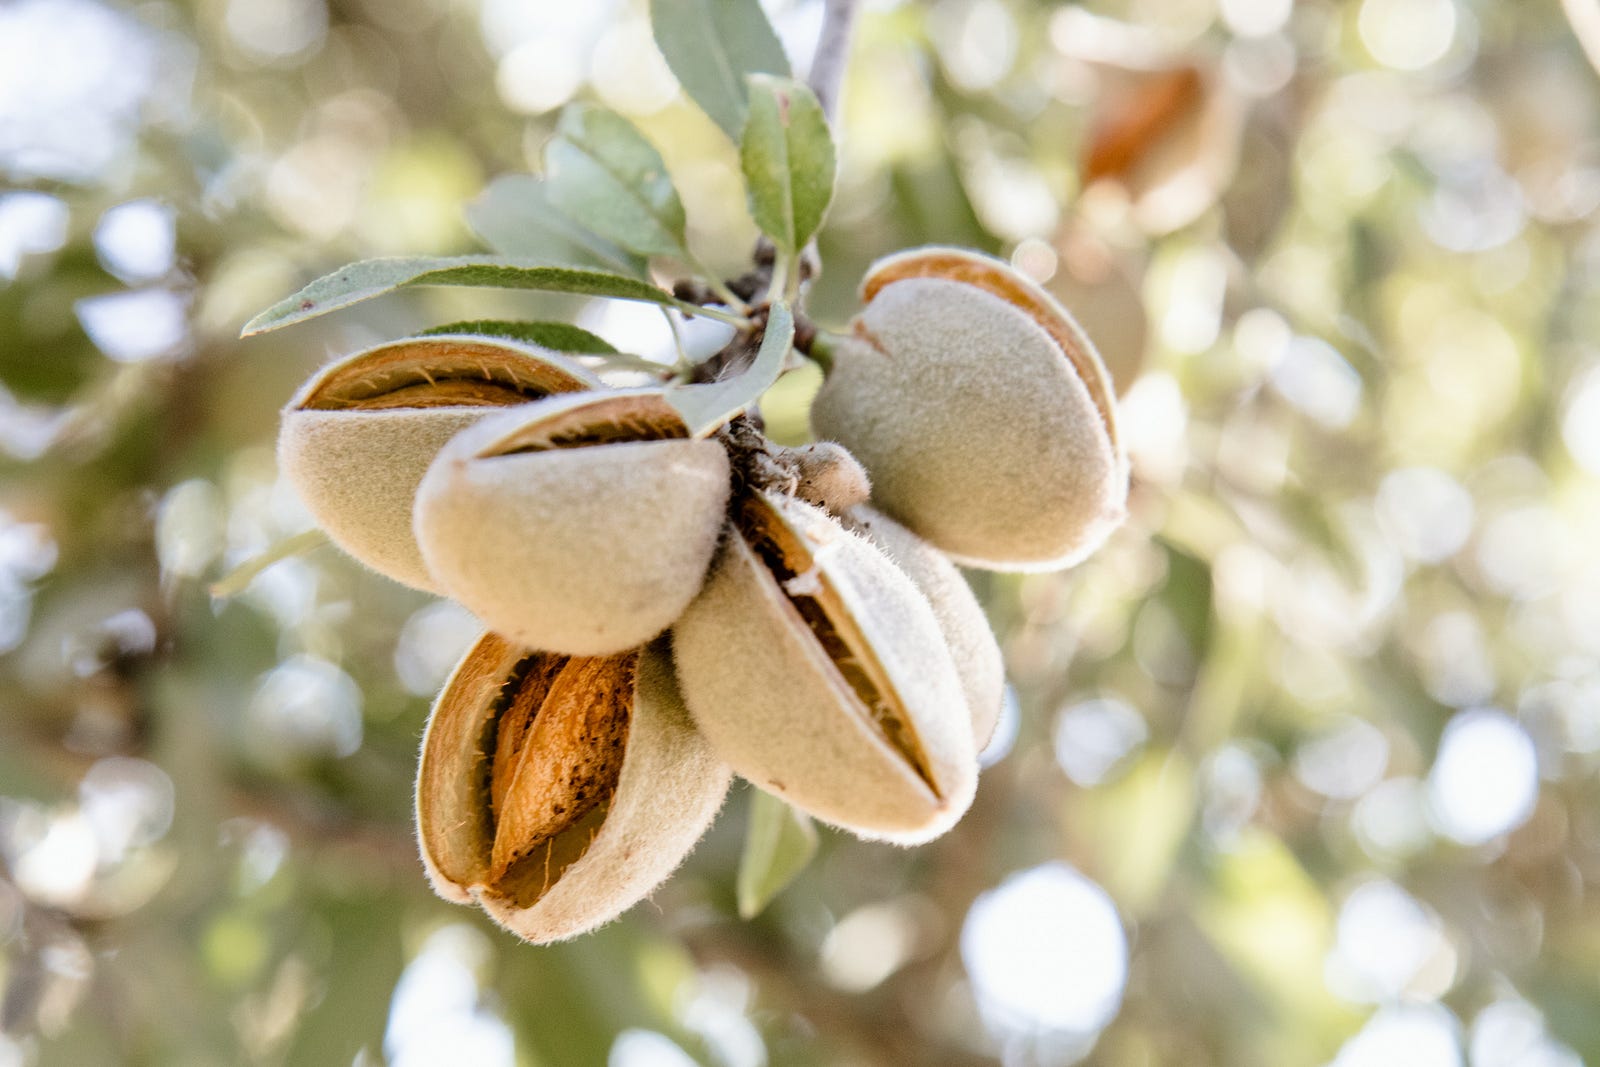 Wee see a bunch of almonds in close-up, hanging from a tree. Examining the effects of energy-restricted diets supplemented with Californian almonds or carbohydrate-rich snacks, researchers found that both diets reduced body weight by about 7 kilograms.